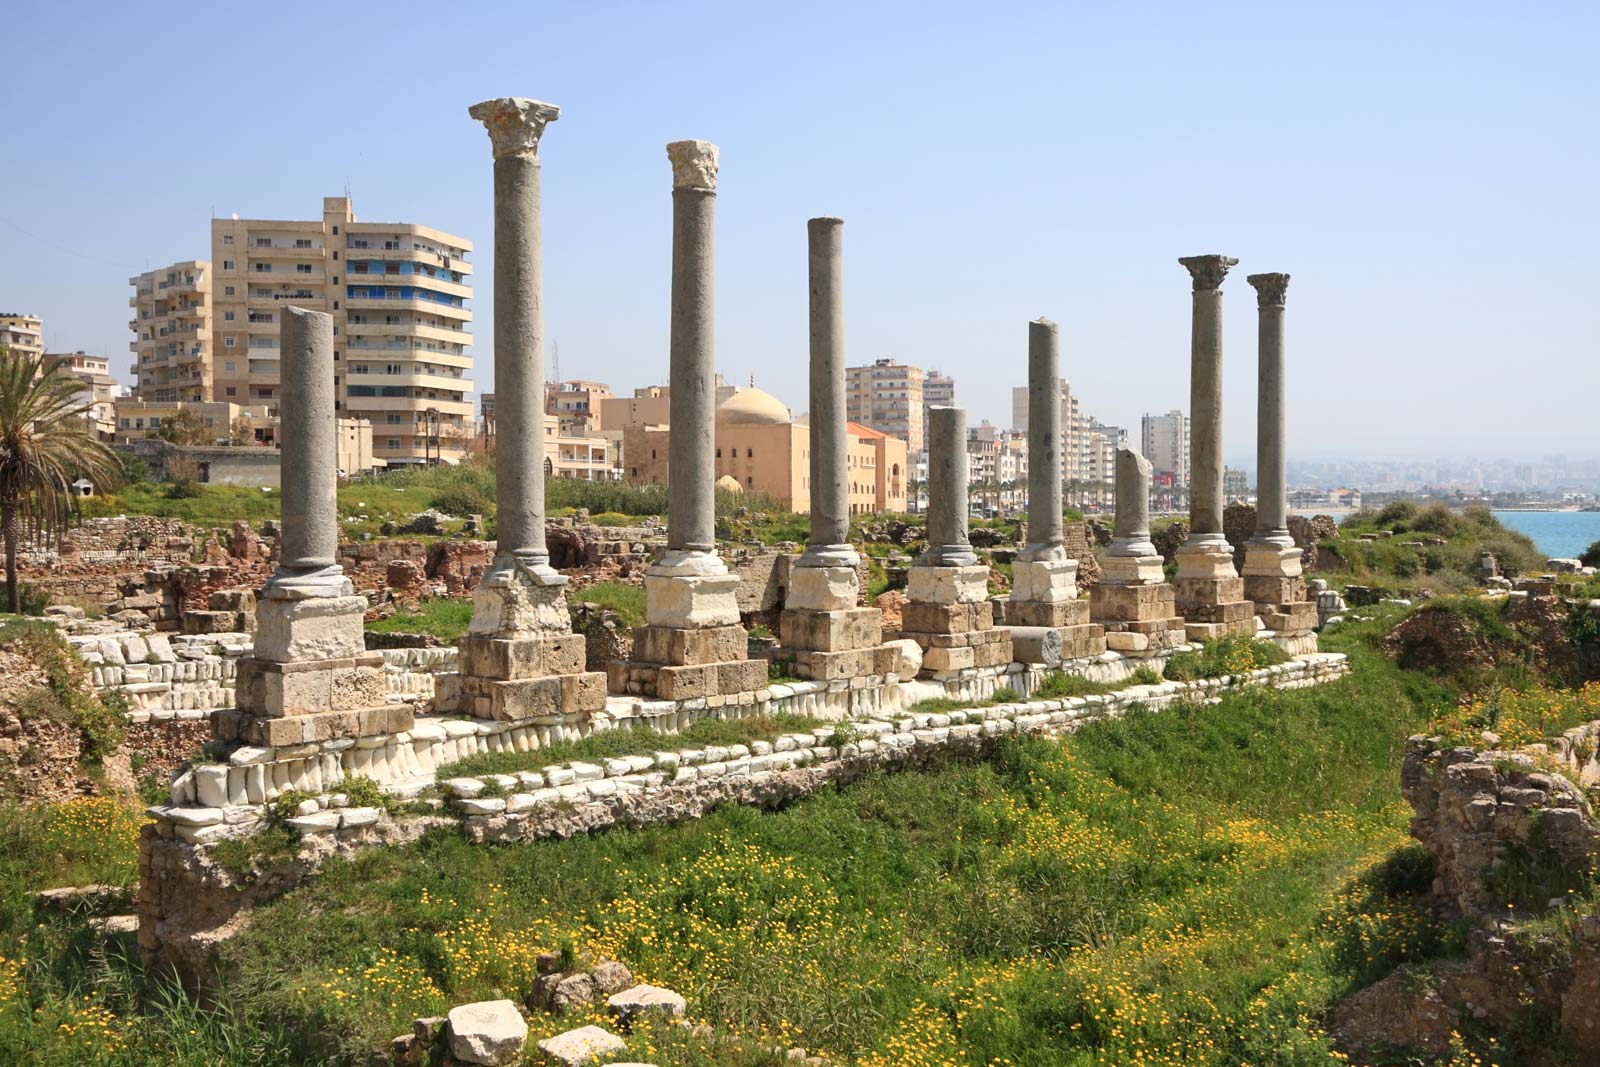 The city next door to the Old City of Tyre has never expanded to the ruins.